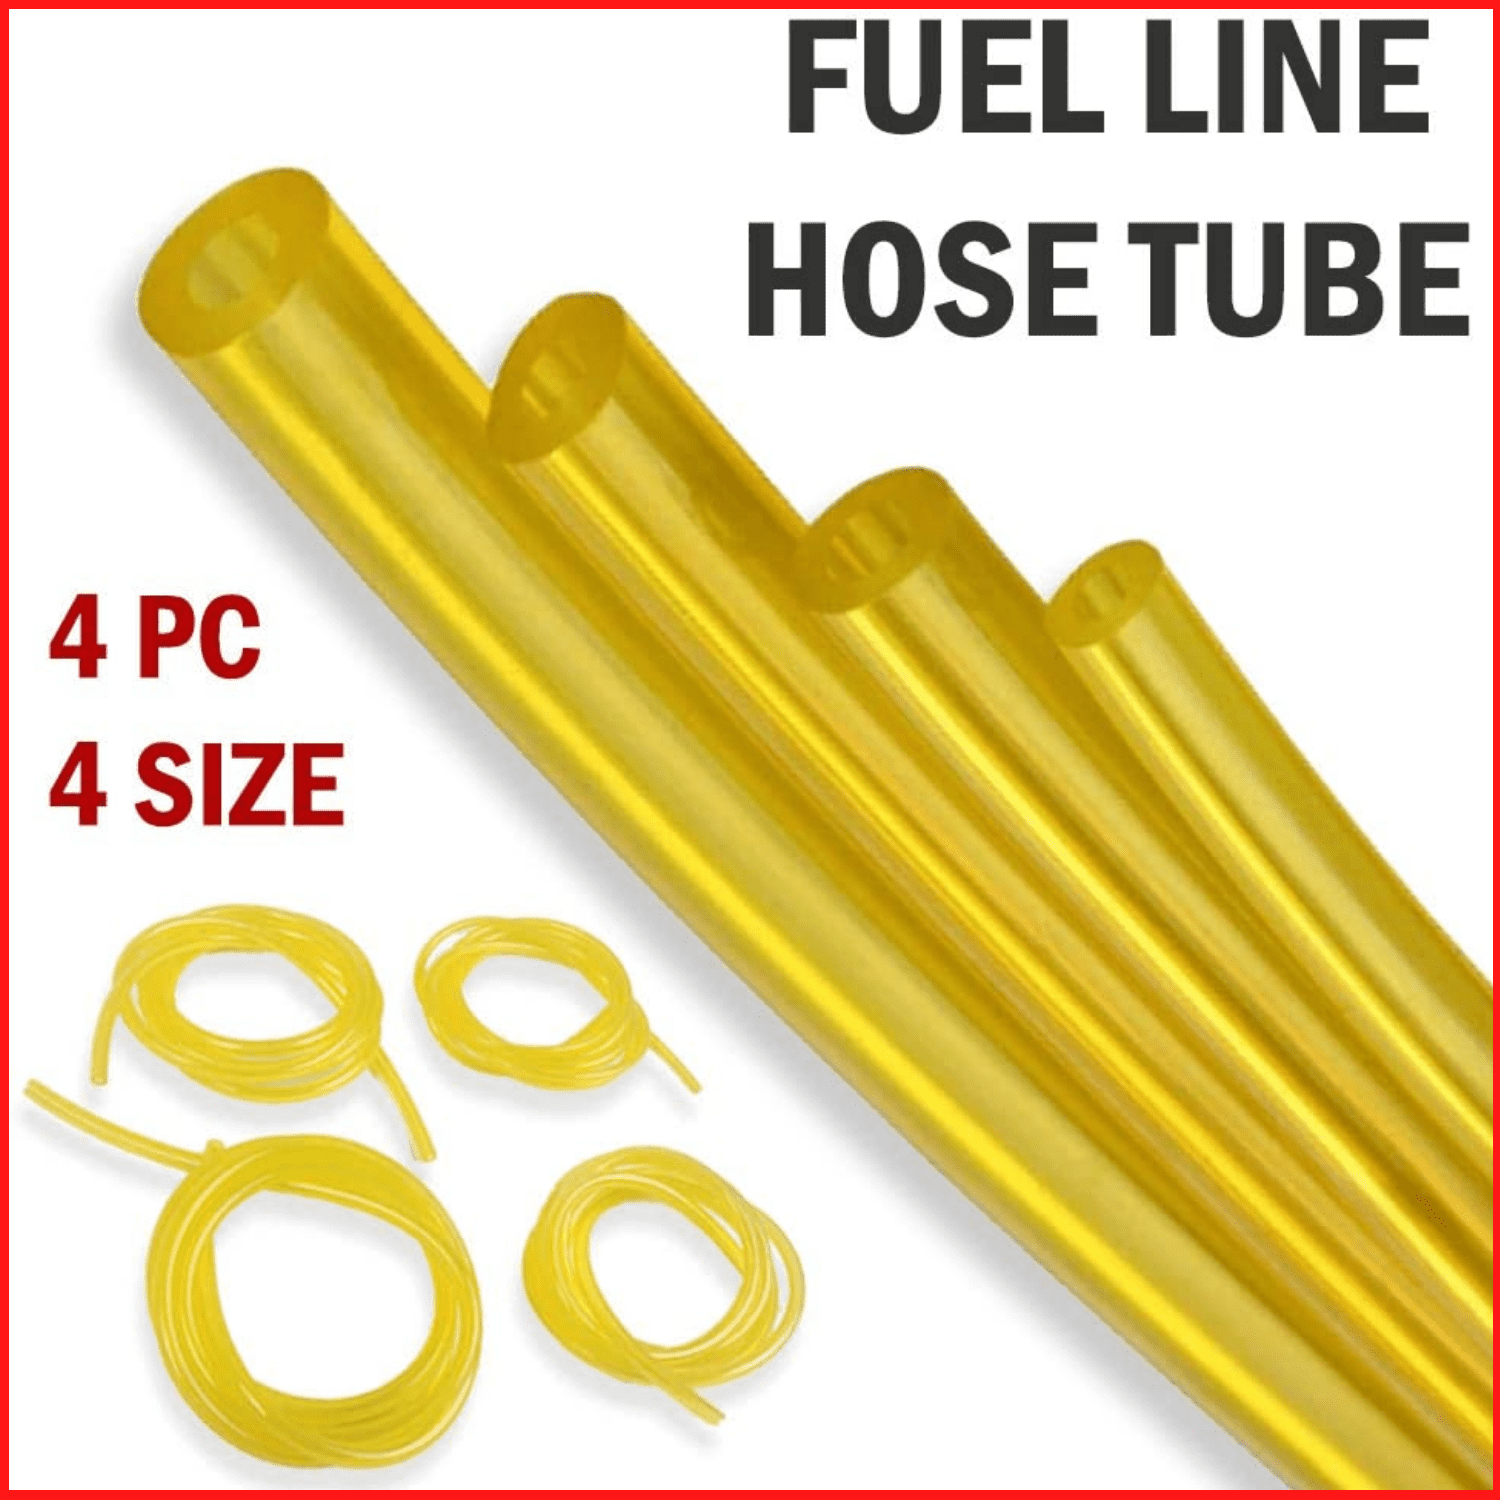 Petrol Fuel Line Hose Gas Pipe Tubing For Trimmer Chainsaw Blower Tools 4 Sizes 